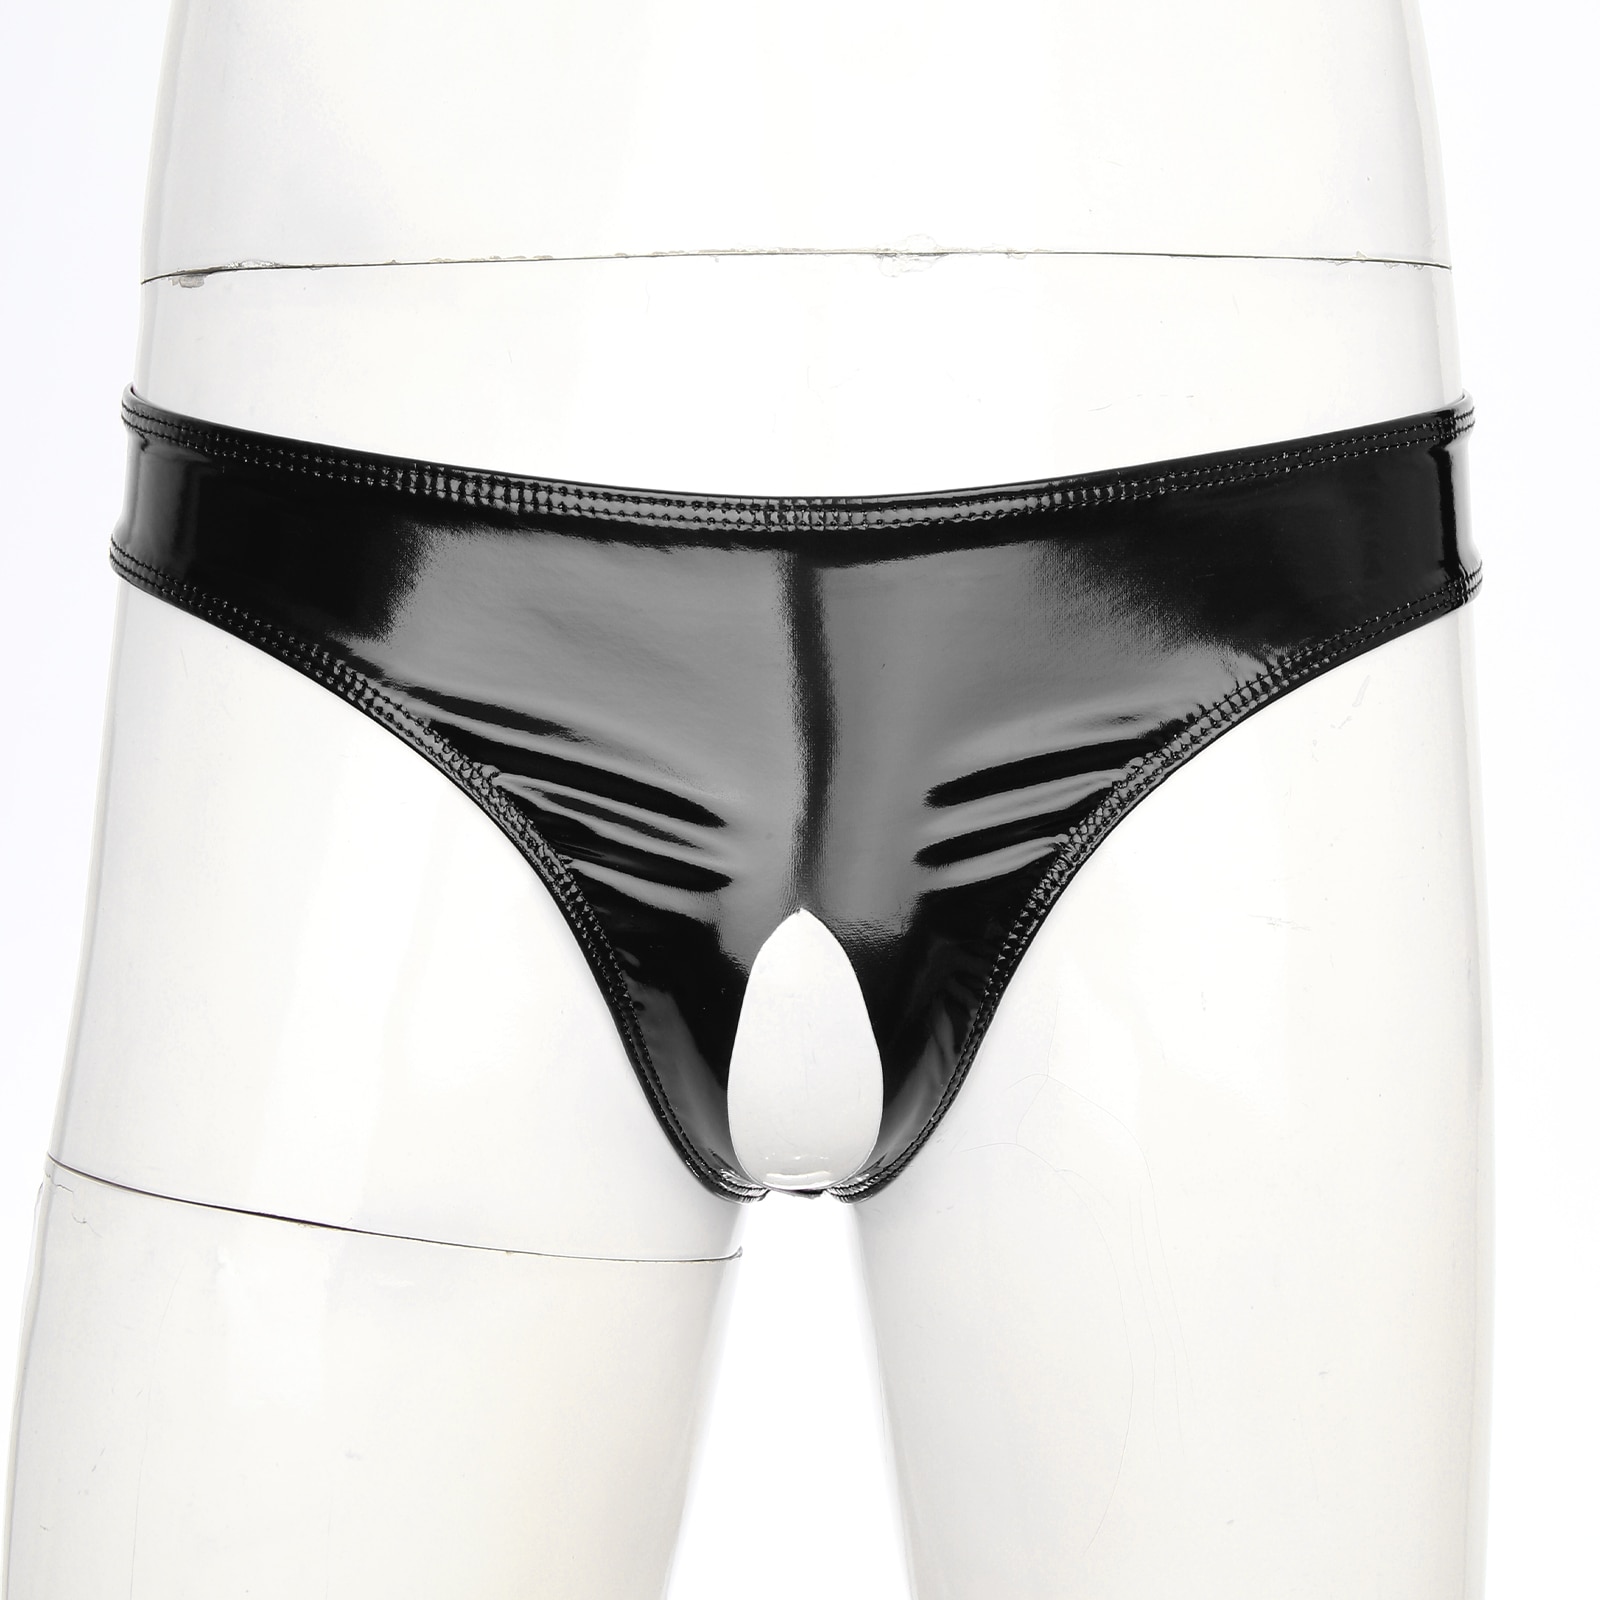 Freebily Mens Wetlook G-String Thong Shinny Leather Front Open